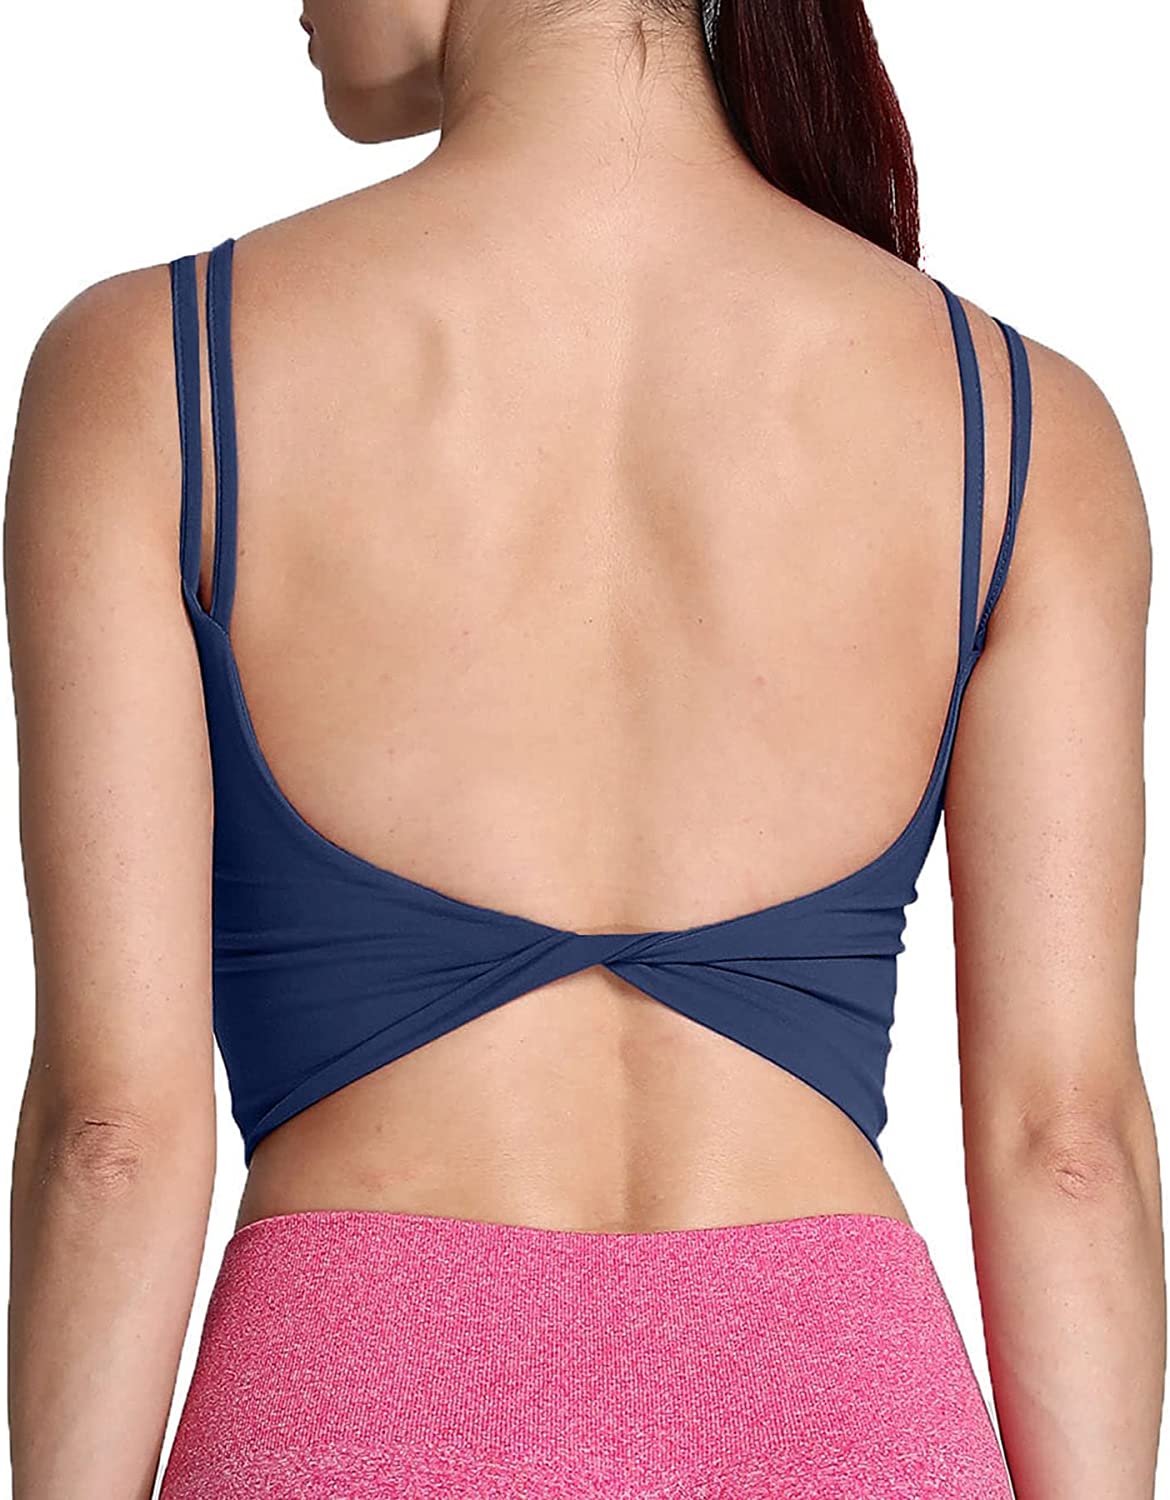 Aoxjox Women's Workout Sports Bras Fitness Padded Backless Yoga